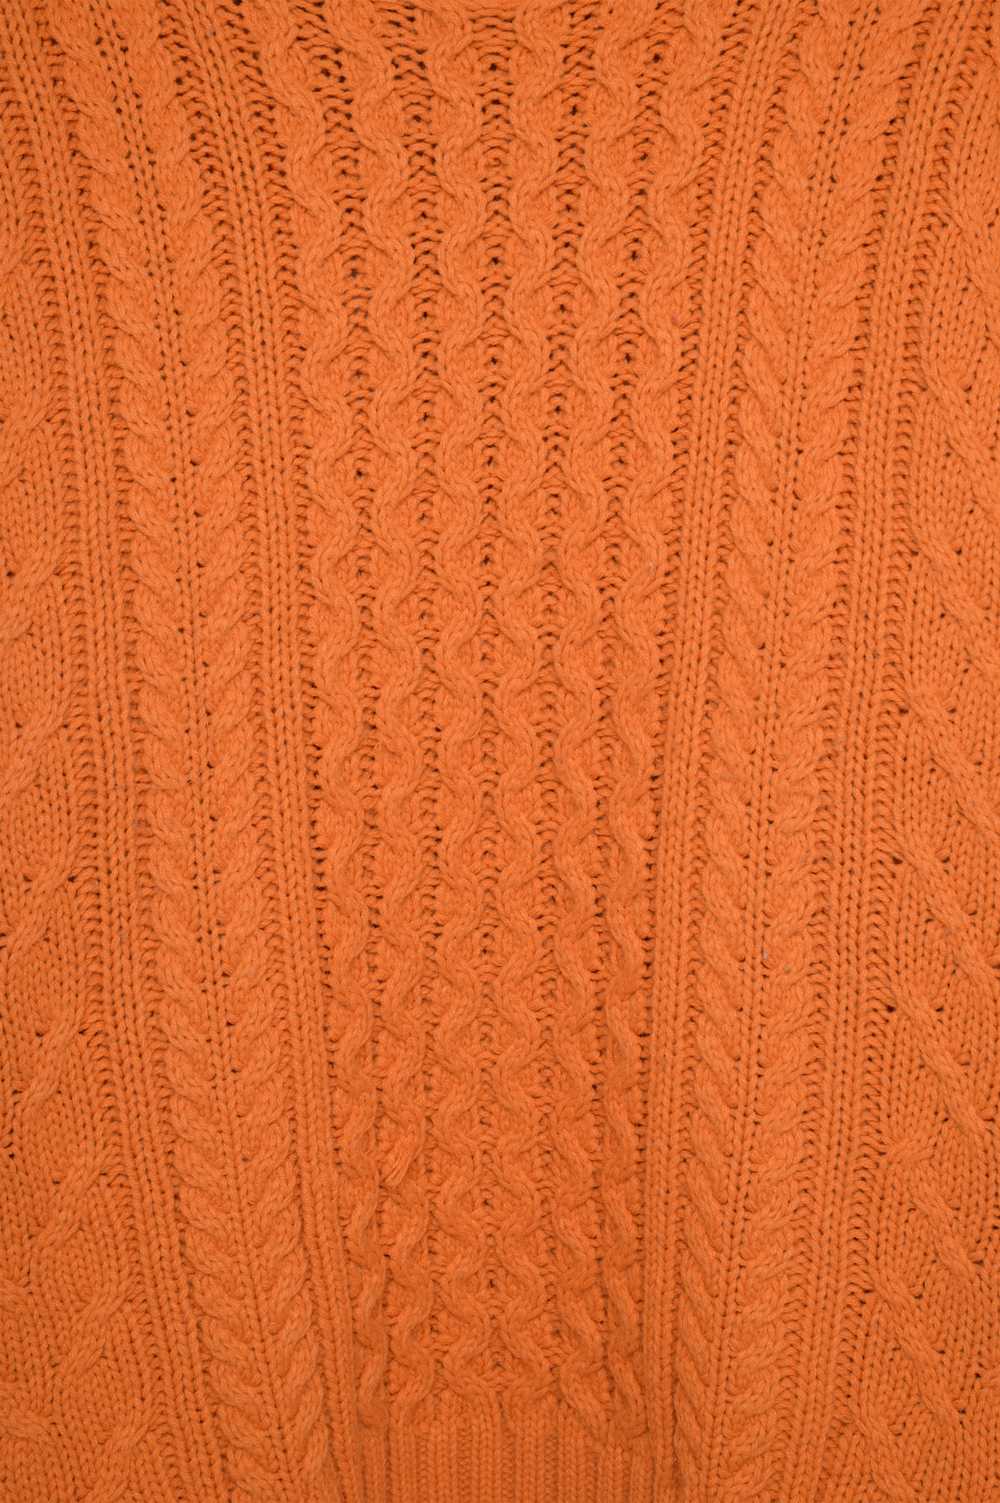 Super Soft Cable Knit Sweater - image 2